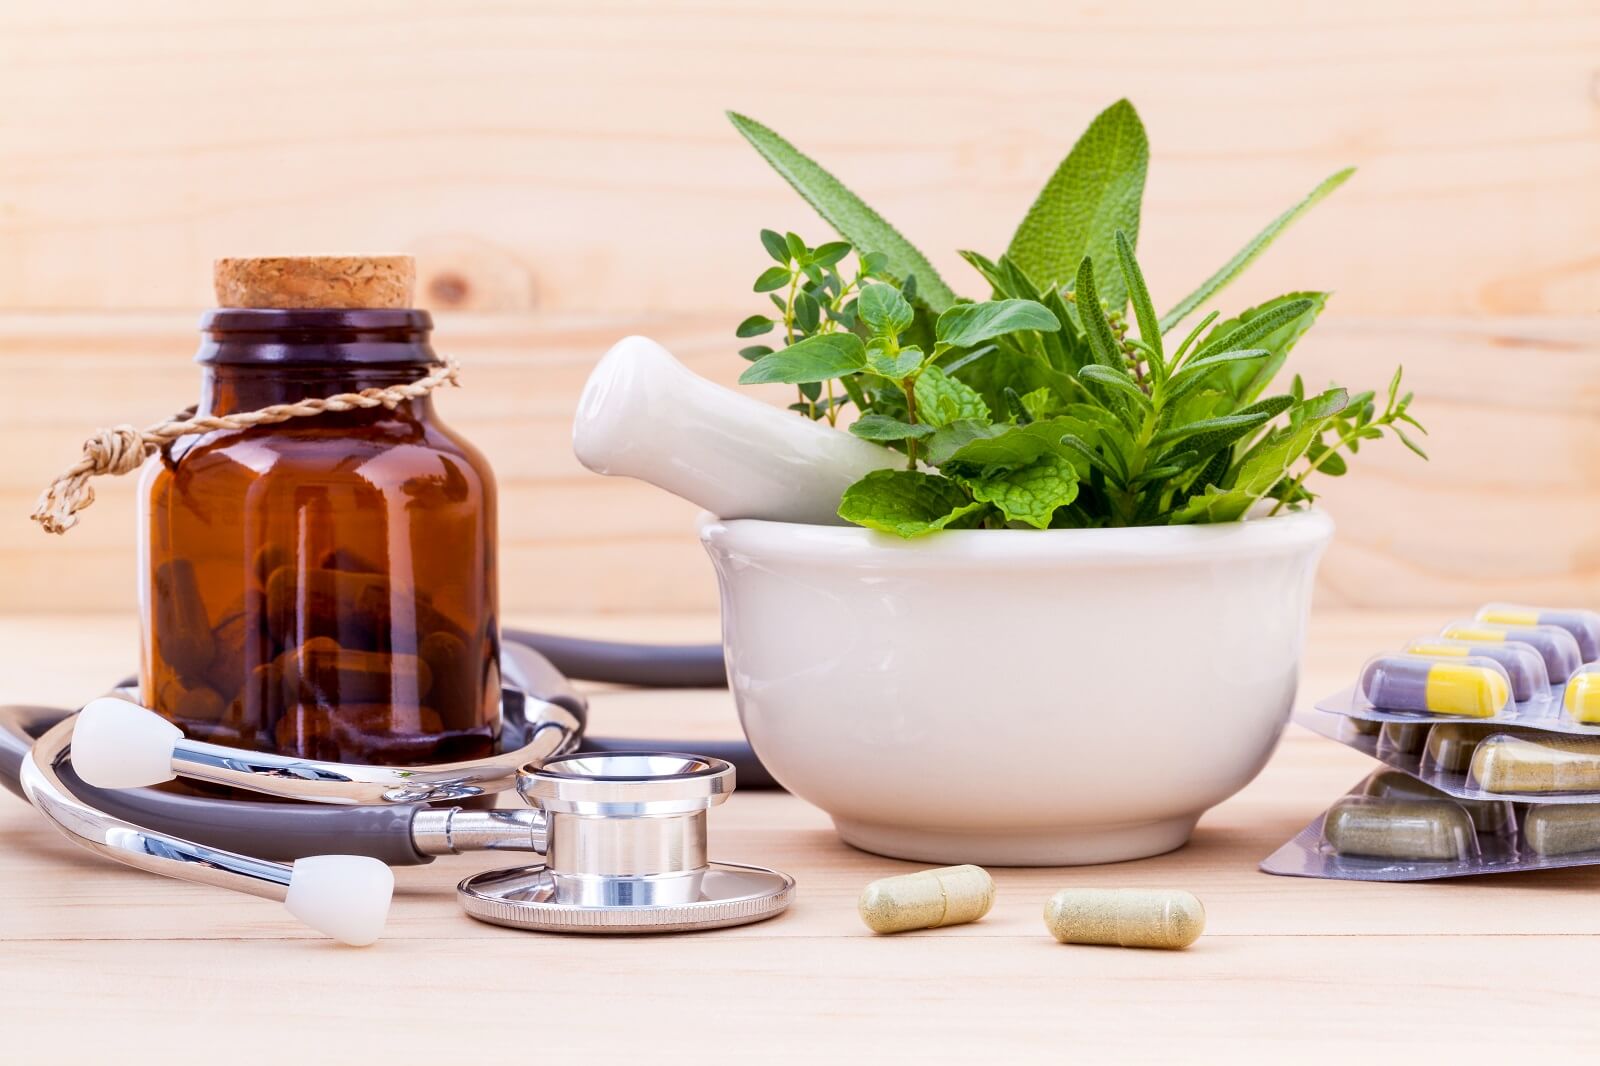 A picture of herbs, mortar and pestle, and stethoscope.